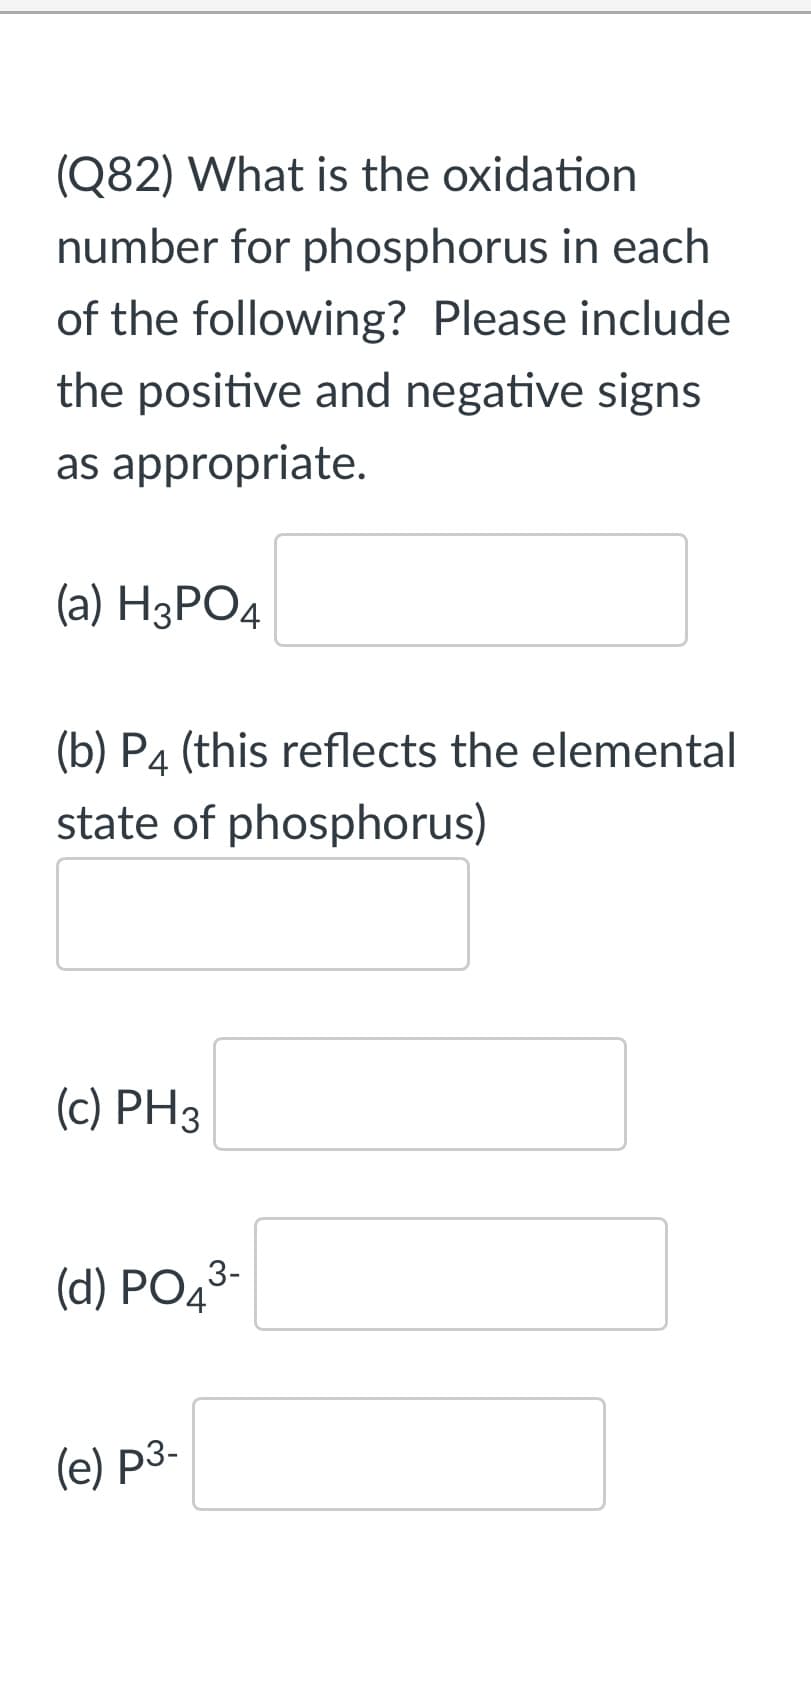 (Q82) What is the oxidation
number for phosphorus in each
of the following? Please include
the positive and negative signs
as appropriate.
(a) НзРОД
(b) P4 (this reflects the elemental
state of phosphorus)
(c) PH3
(d) PO43-
(e) p3-
